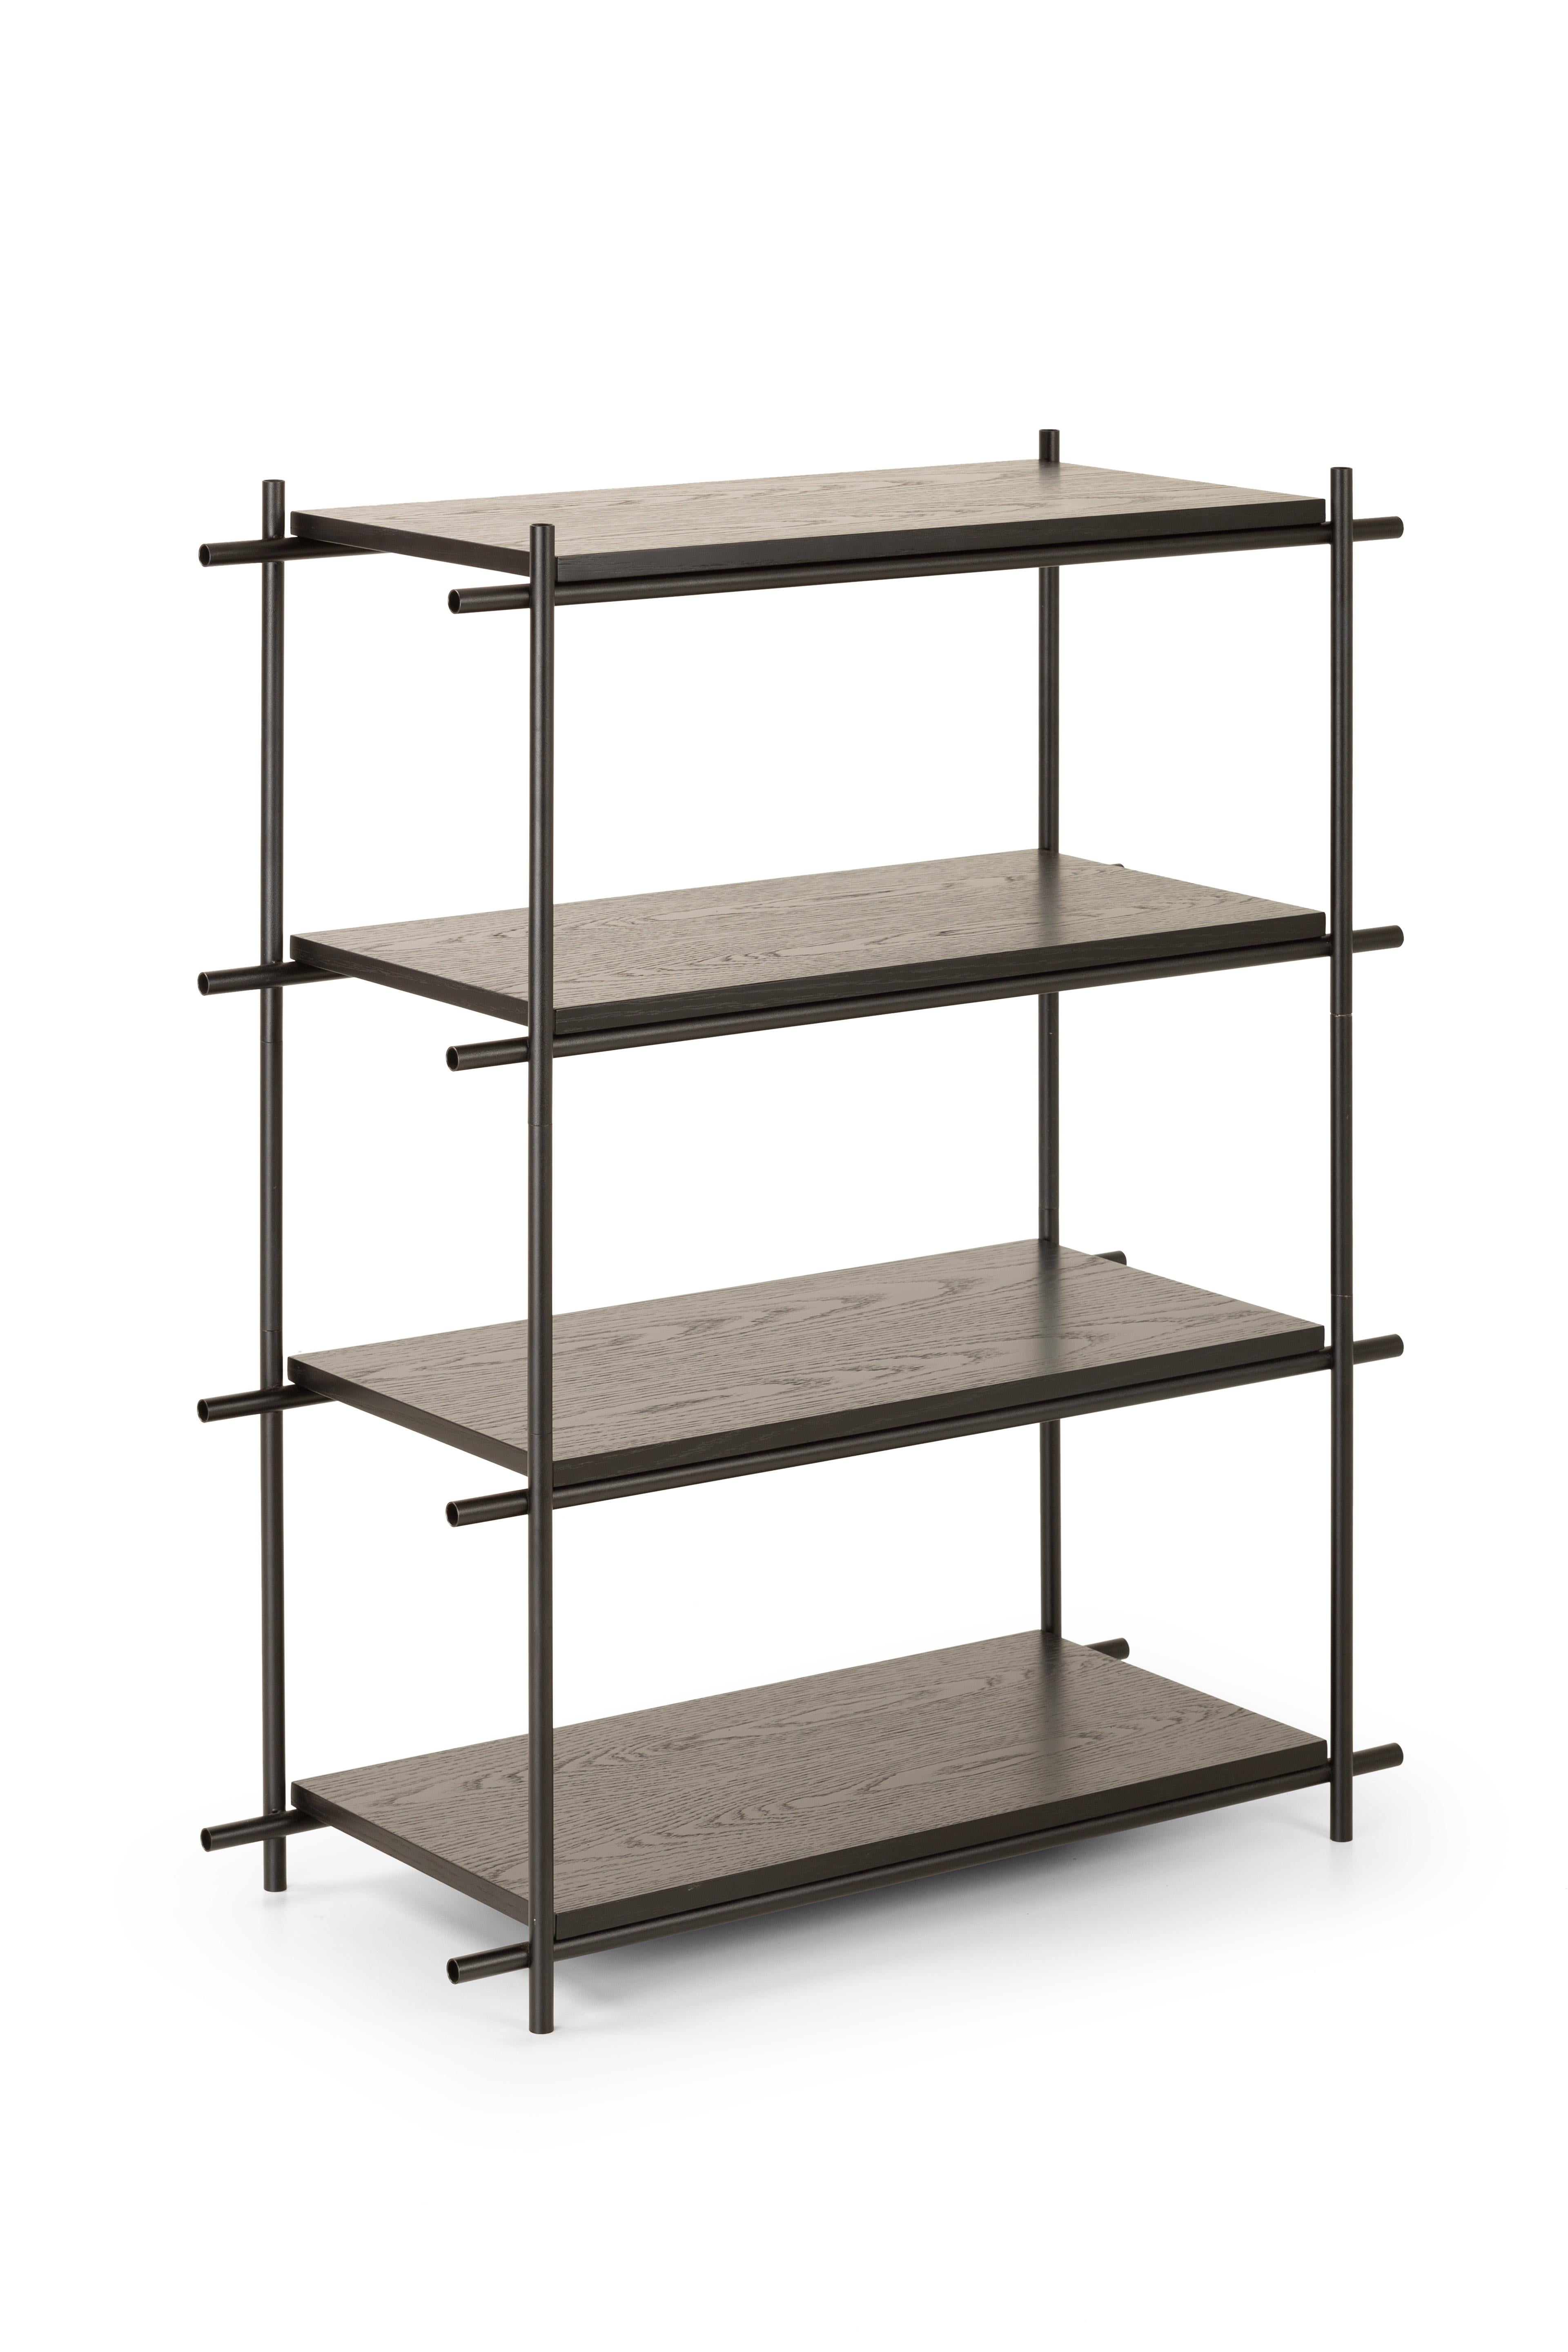 Innocent bookshelf three modules by Mingardo
Dimensions: D90 x W39 x H110 cm 
Materials: RAL 9005 black varnished iron structure, shelf in black stained oak
Weight: 60 kg

Also available in different dimensions. 

The Innocent project is